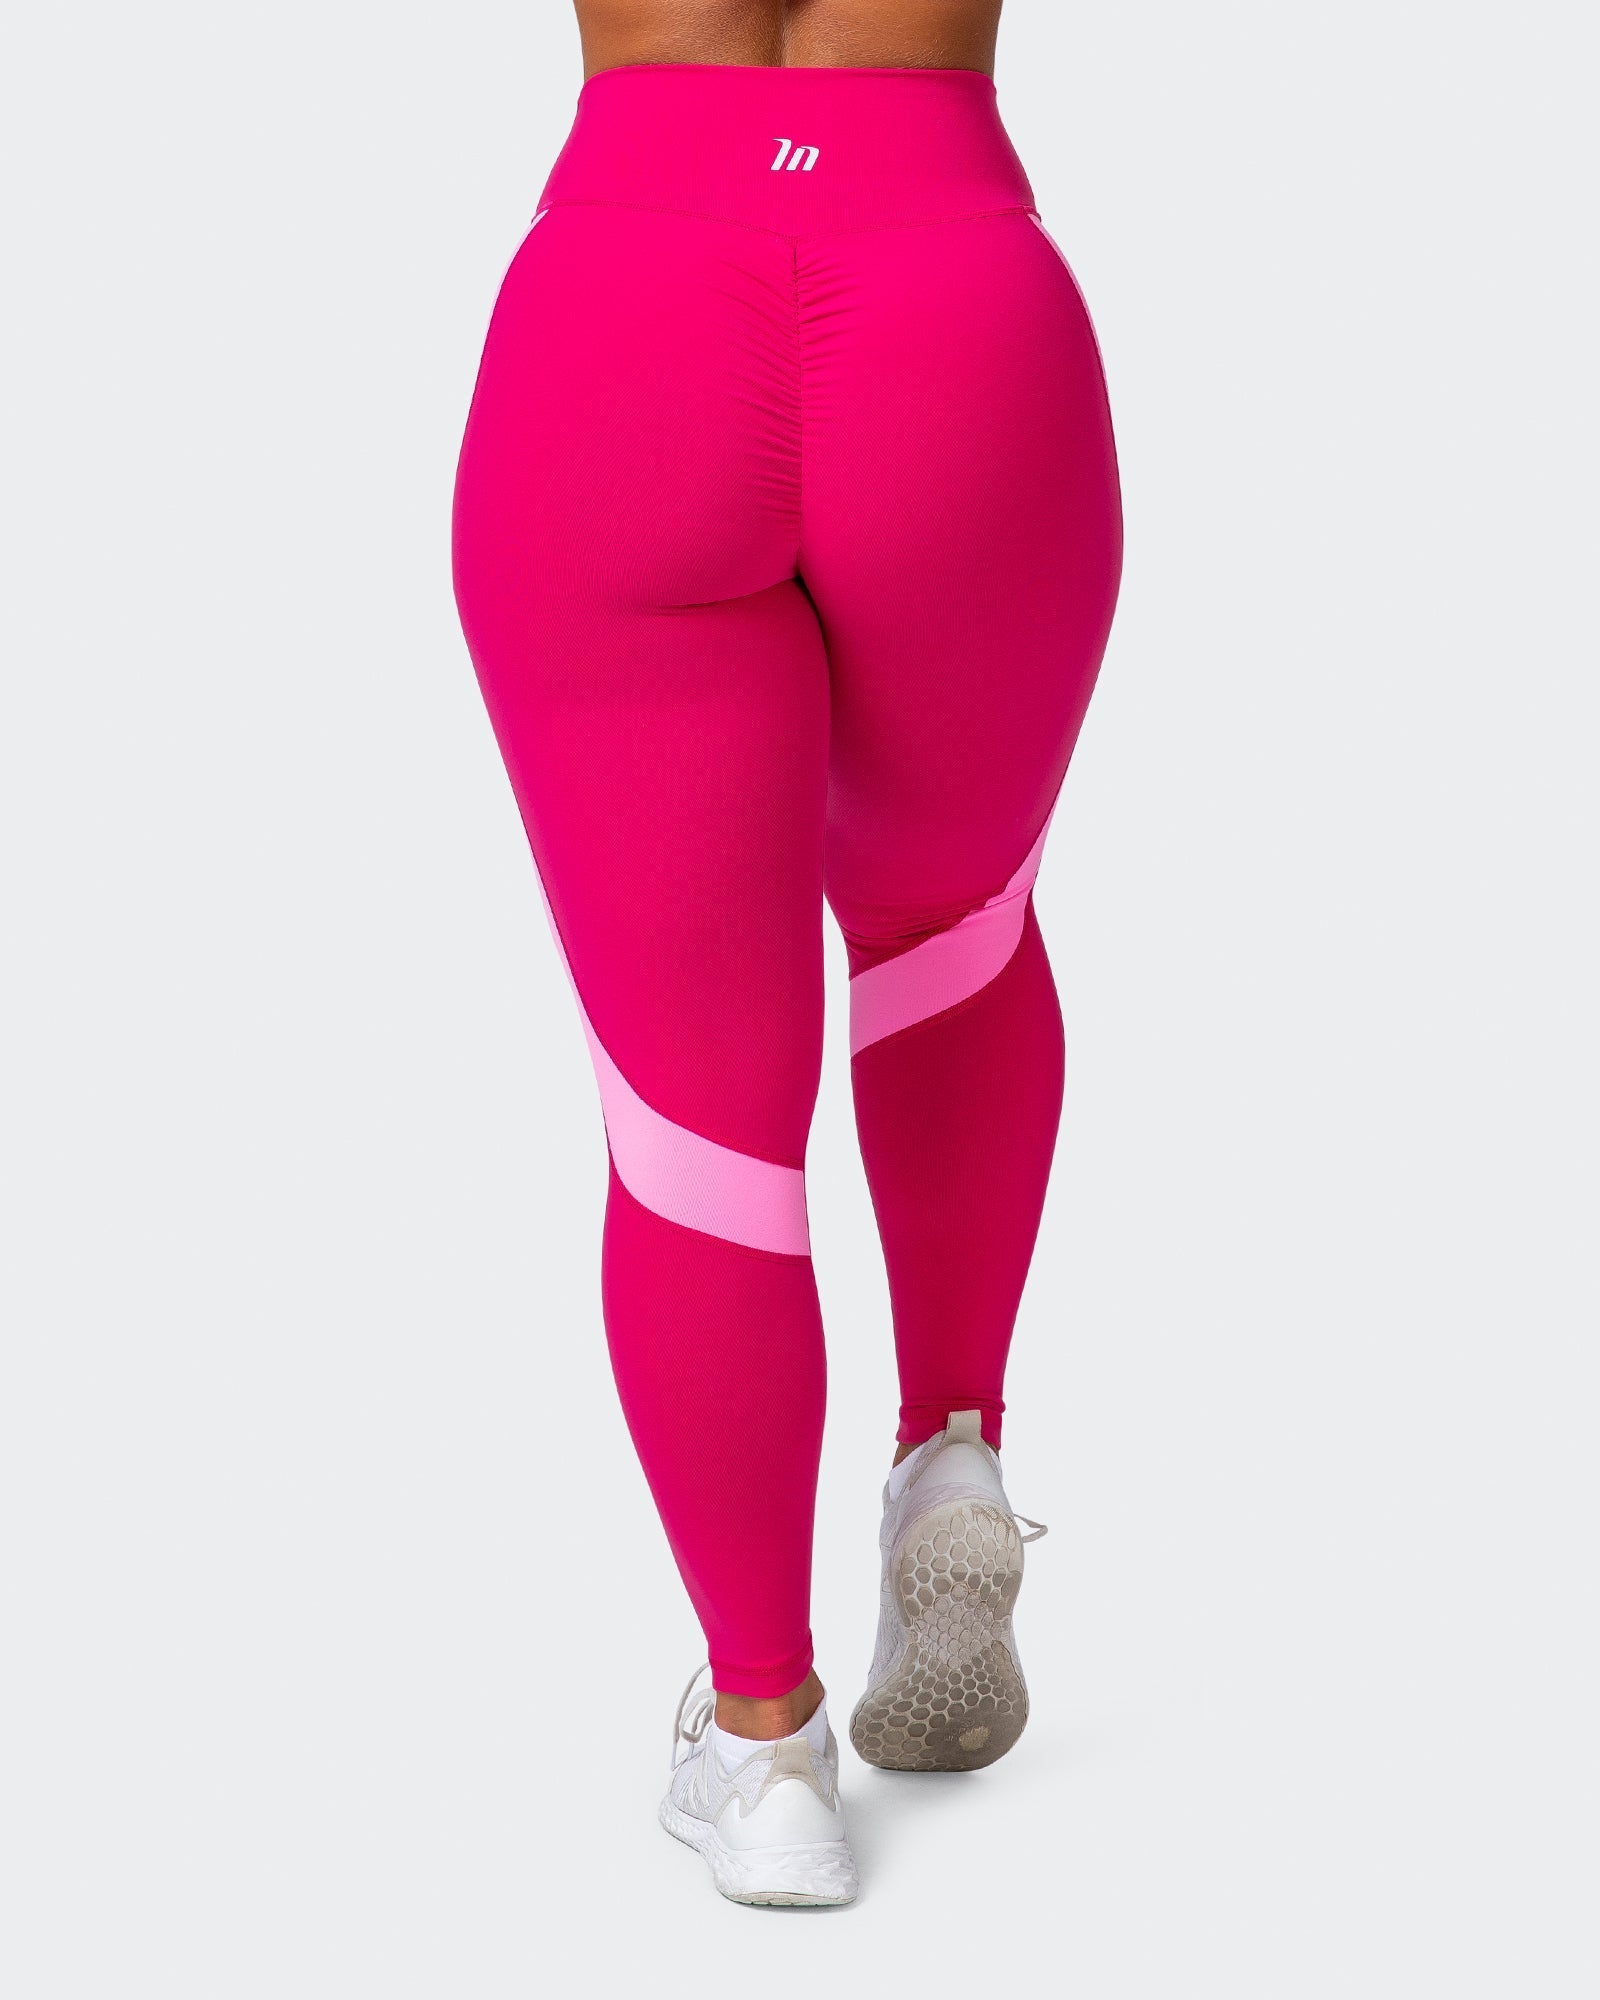 musclenation Tights SUNLIGHT SIGNATURE SCRUNCH ANKLE LENGTH LEGGINGS Pink Punch